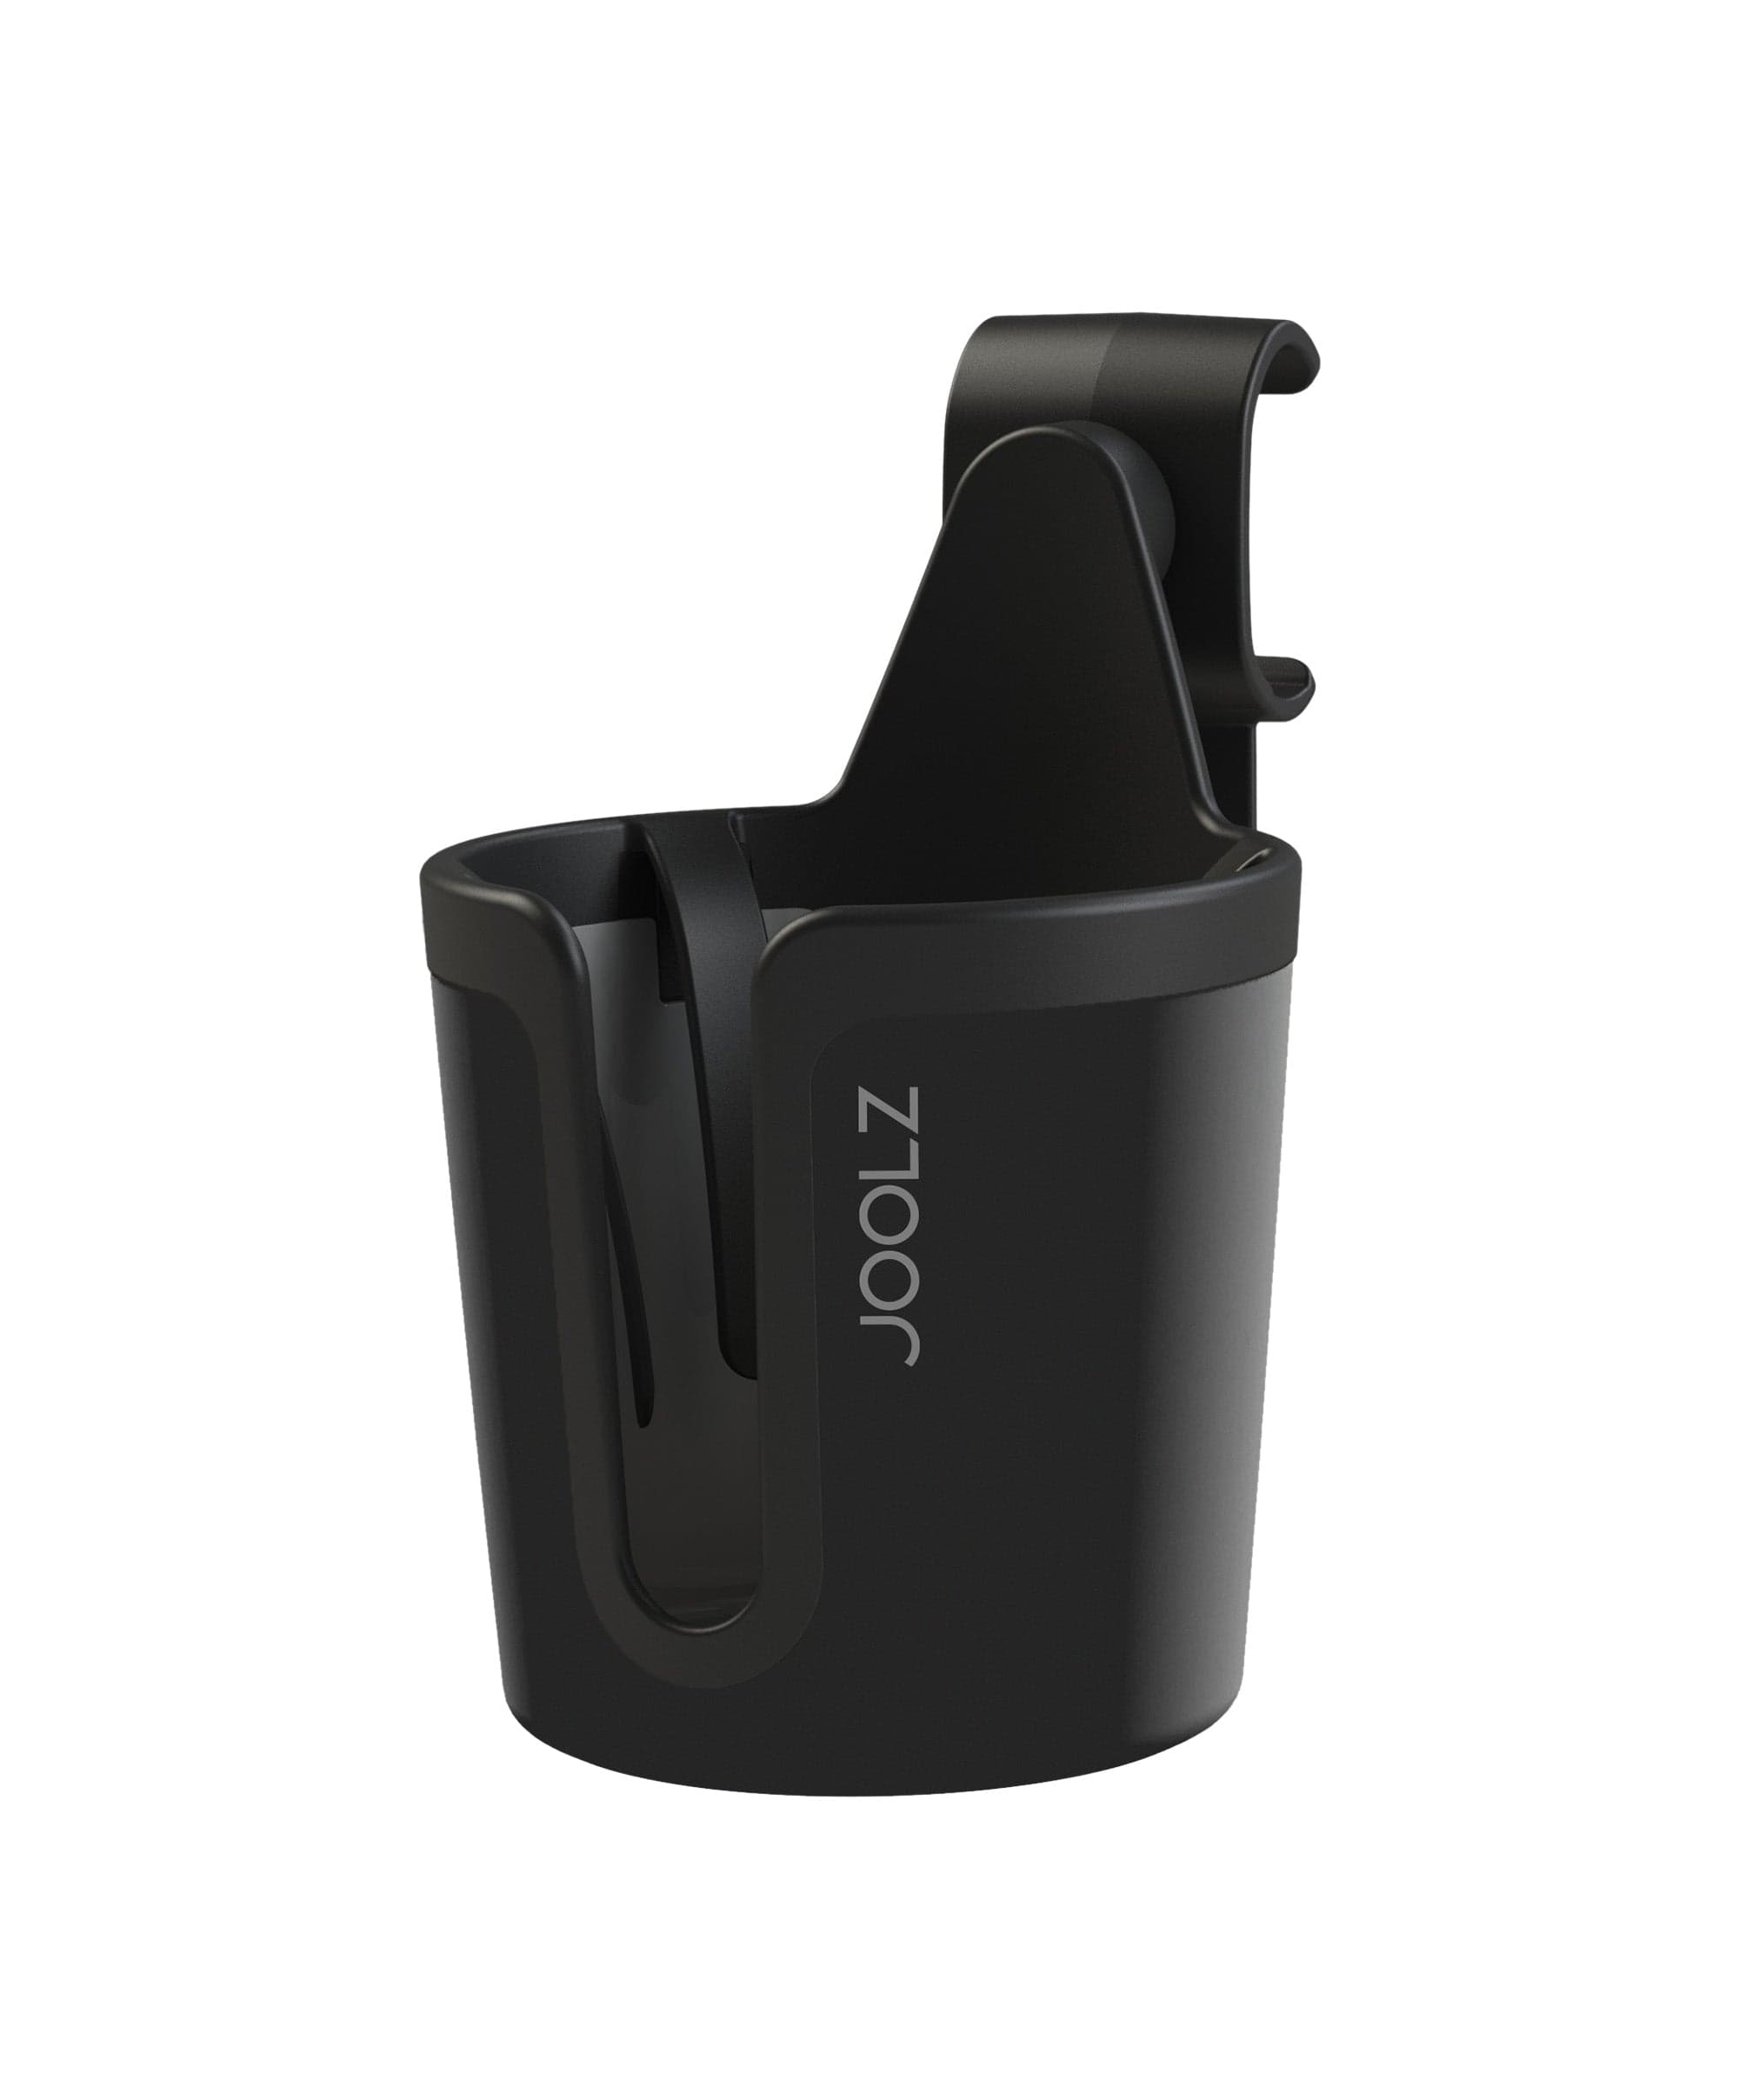 Joolz Cup holder in Black